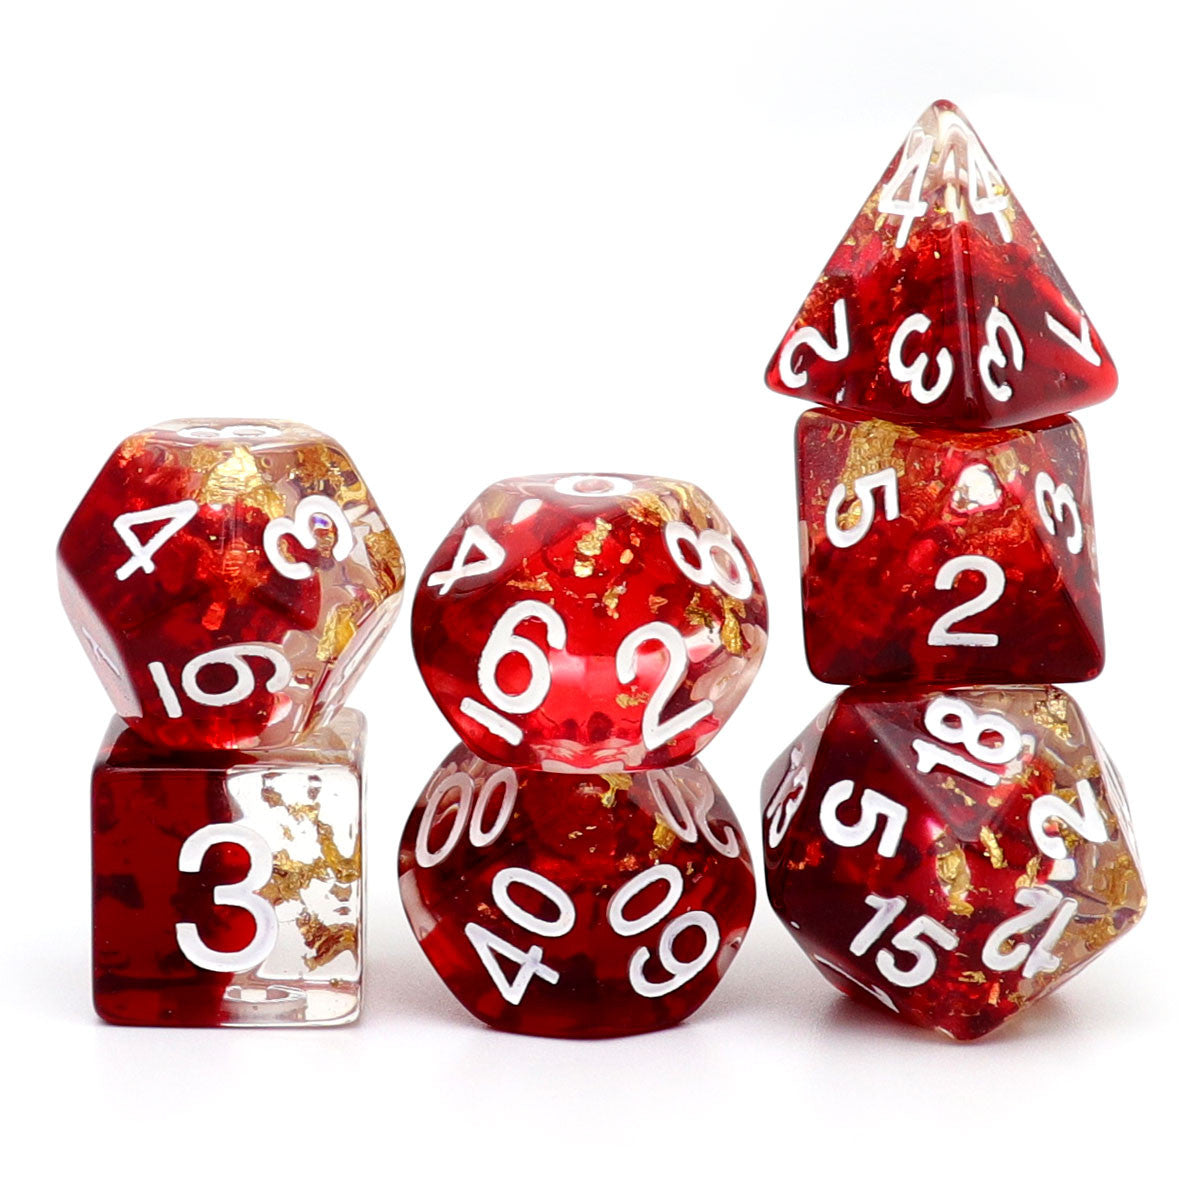 red resin dice, resin dice, dnd dice, dice set, dungeons and dragons, haxtec dice, rpg dice, red dice. gold leaf dice